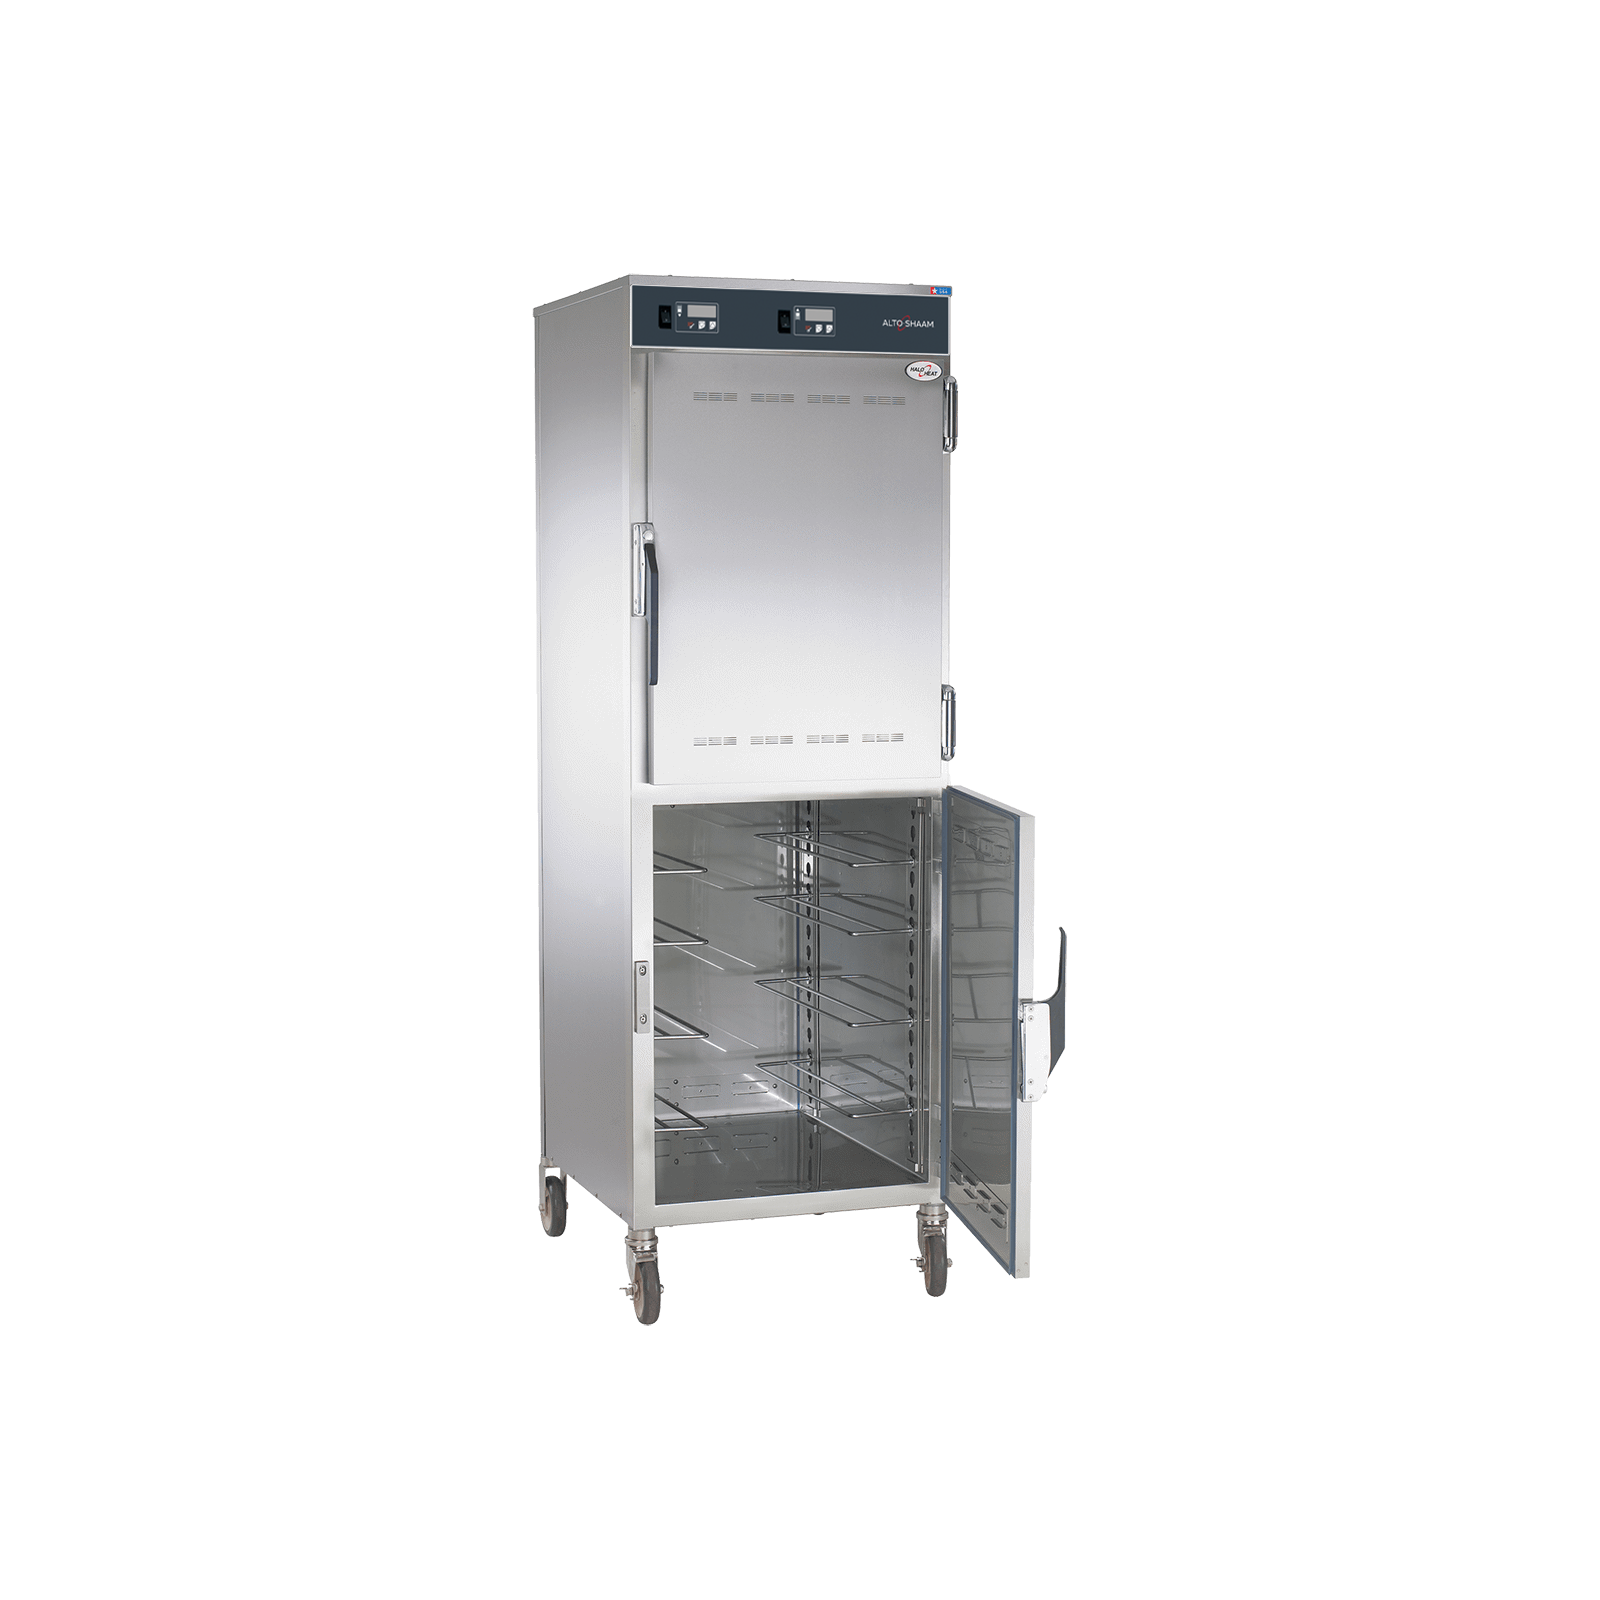 Low Temperature Halo Heat Holding Cabinet Alto Shaam